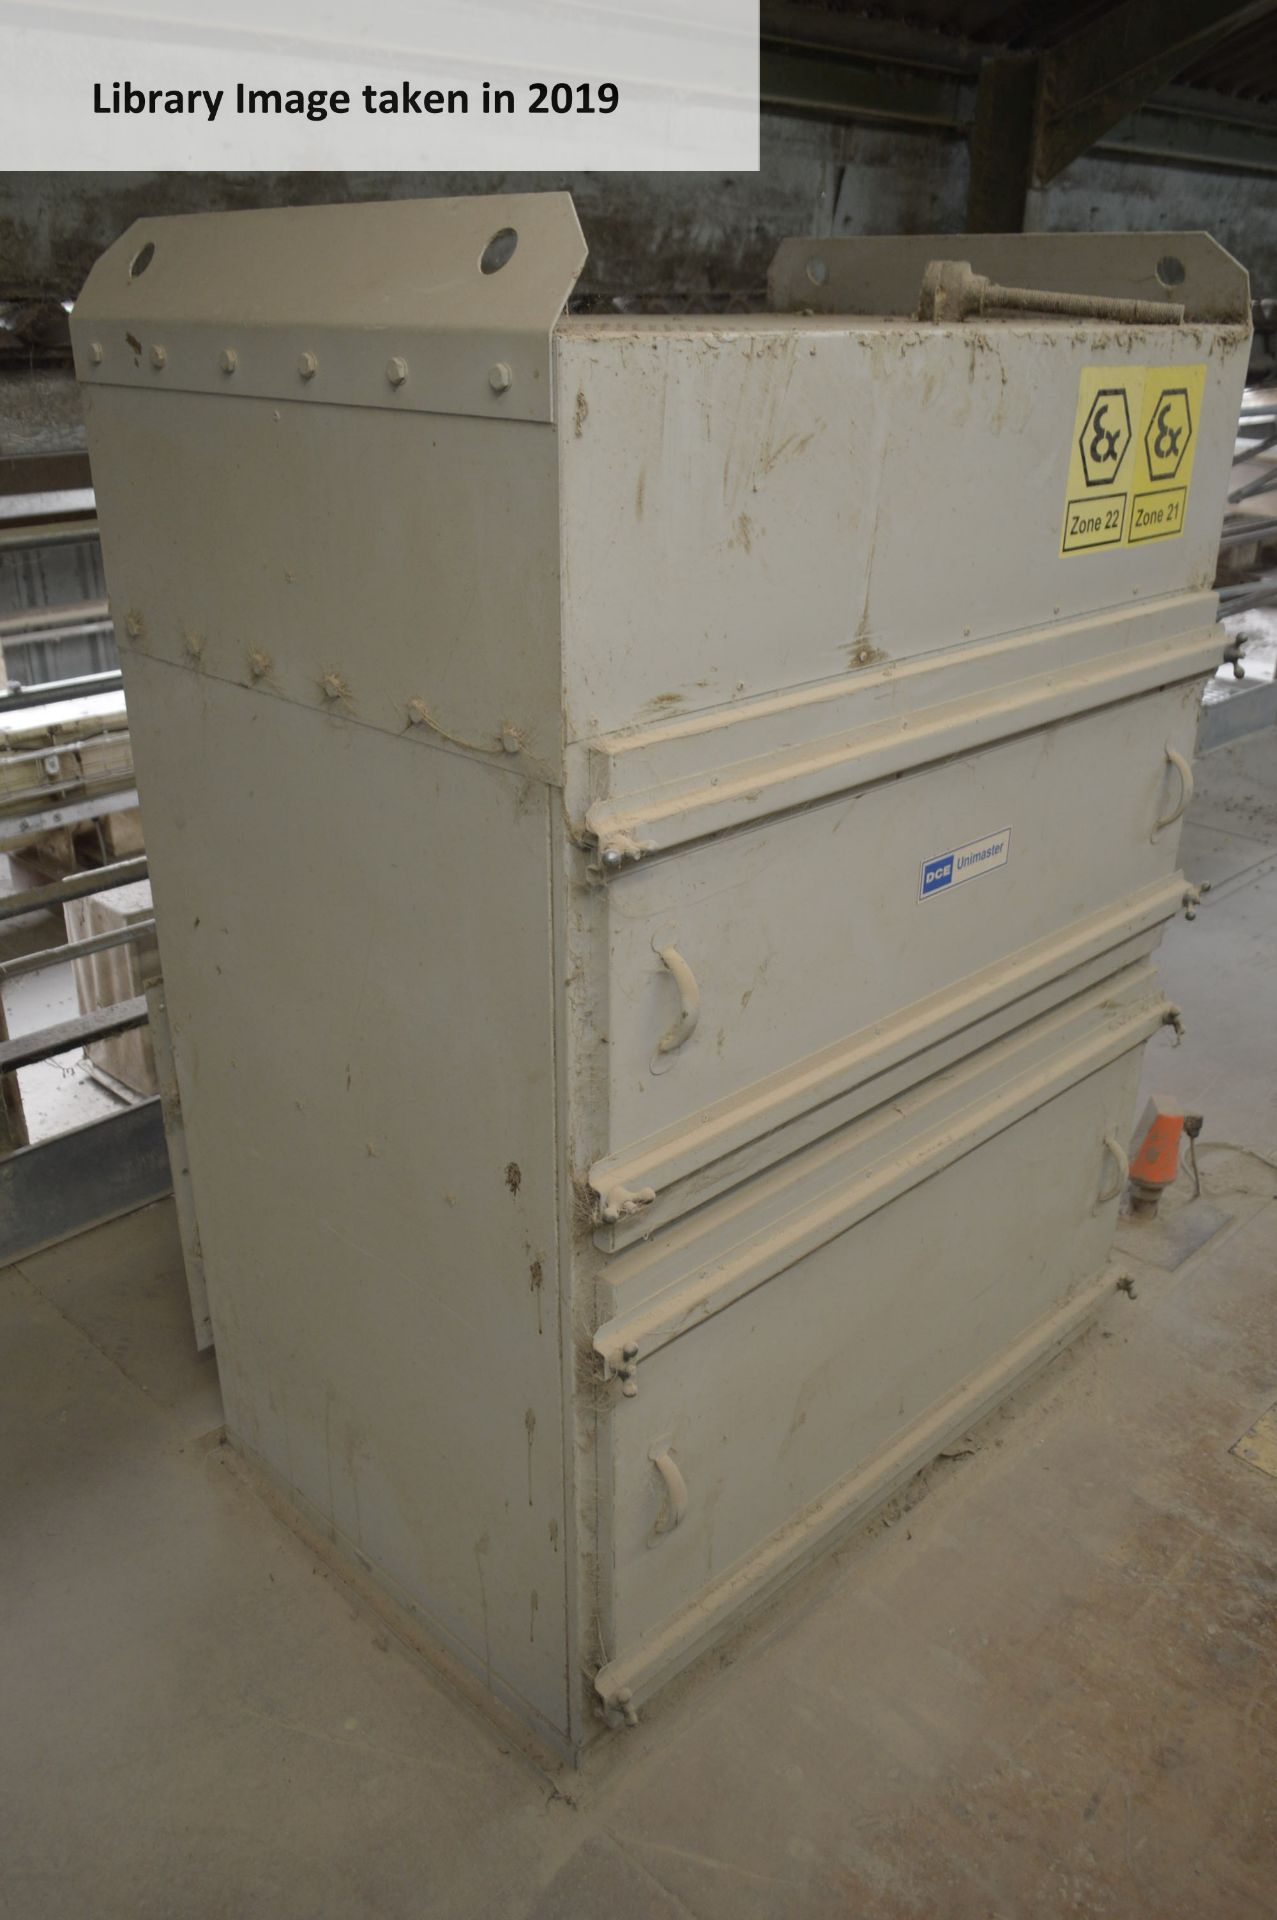 (KDM) DCE Unimaster 250HK3 Dust Venting Unit, serial no. 675073, year of manufacture 2000 (located - Image 2 of 4